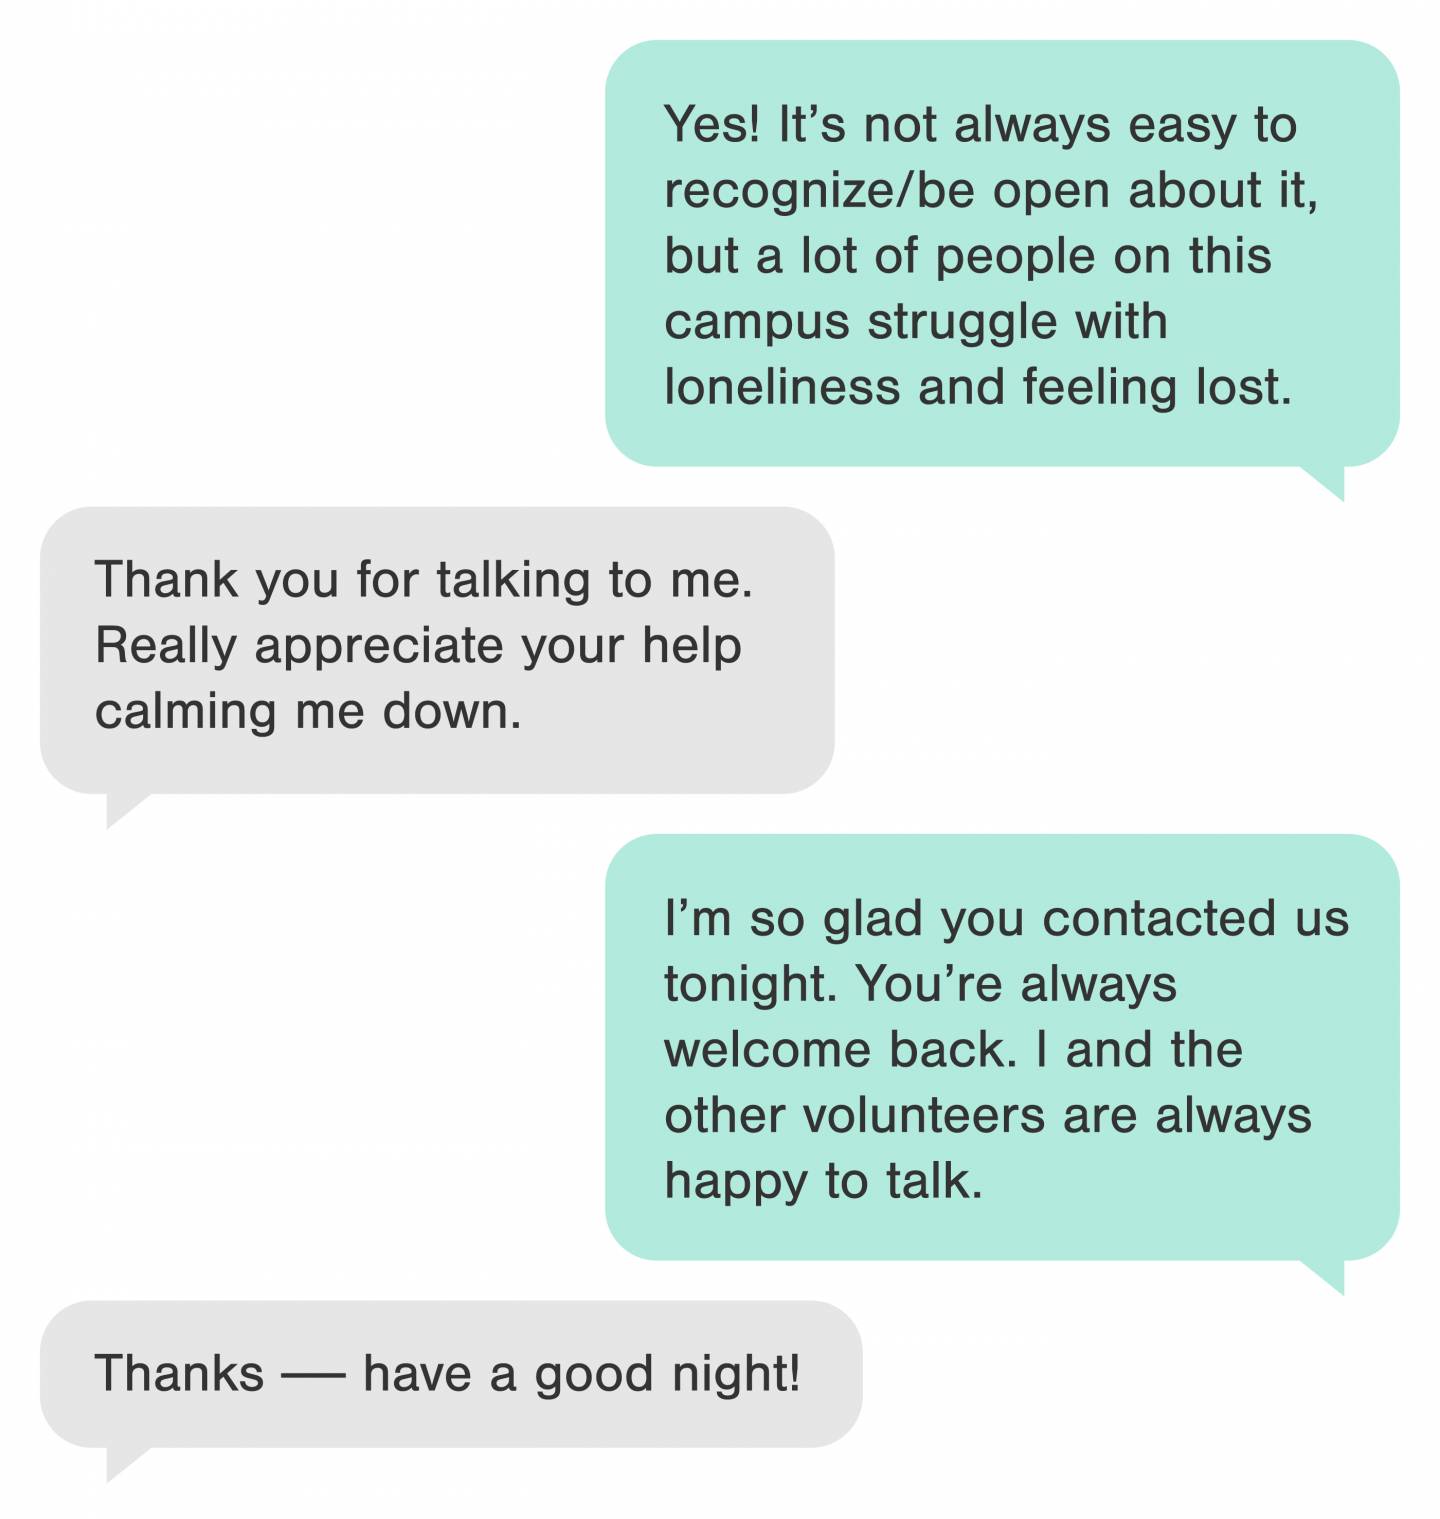 Chat conversation showing the following conversation. Nightline: Yes! It’s not always easy to recognize/be open about it, but a lot of people on this campus struggle with loneliness and feeling lost. Student: Thank you for talking to me. Really appreciate your help calming me down. Nightline: I’m so glad you contacted us tonight. You’re always welcome back. I and the other volunteers are always happy to talk. Student: Thanks ---- have a good night!